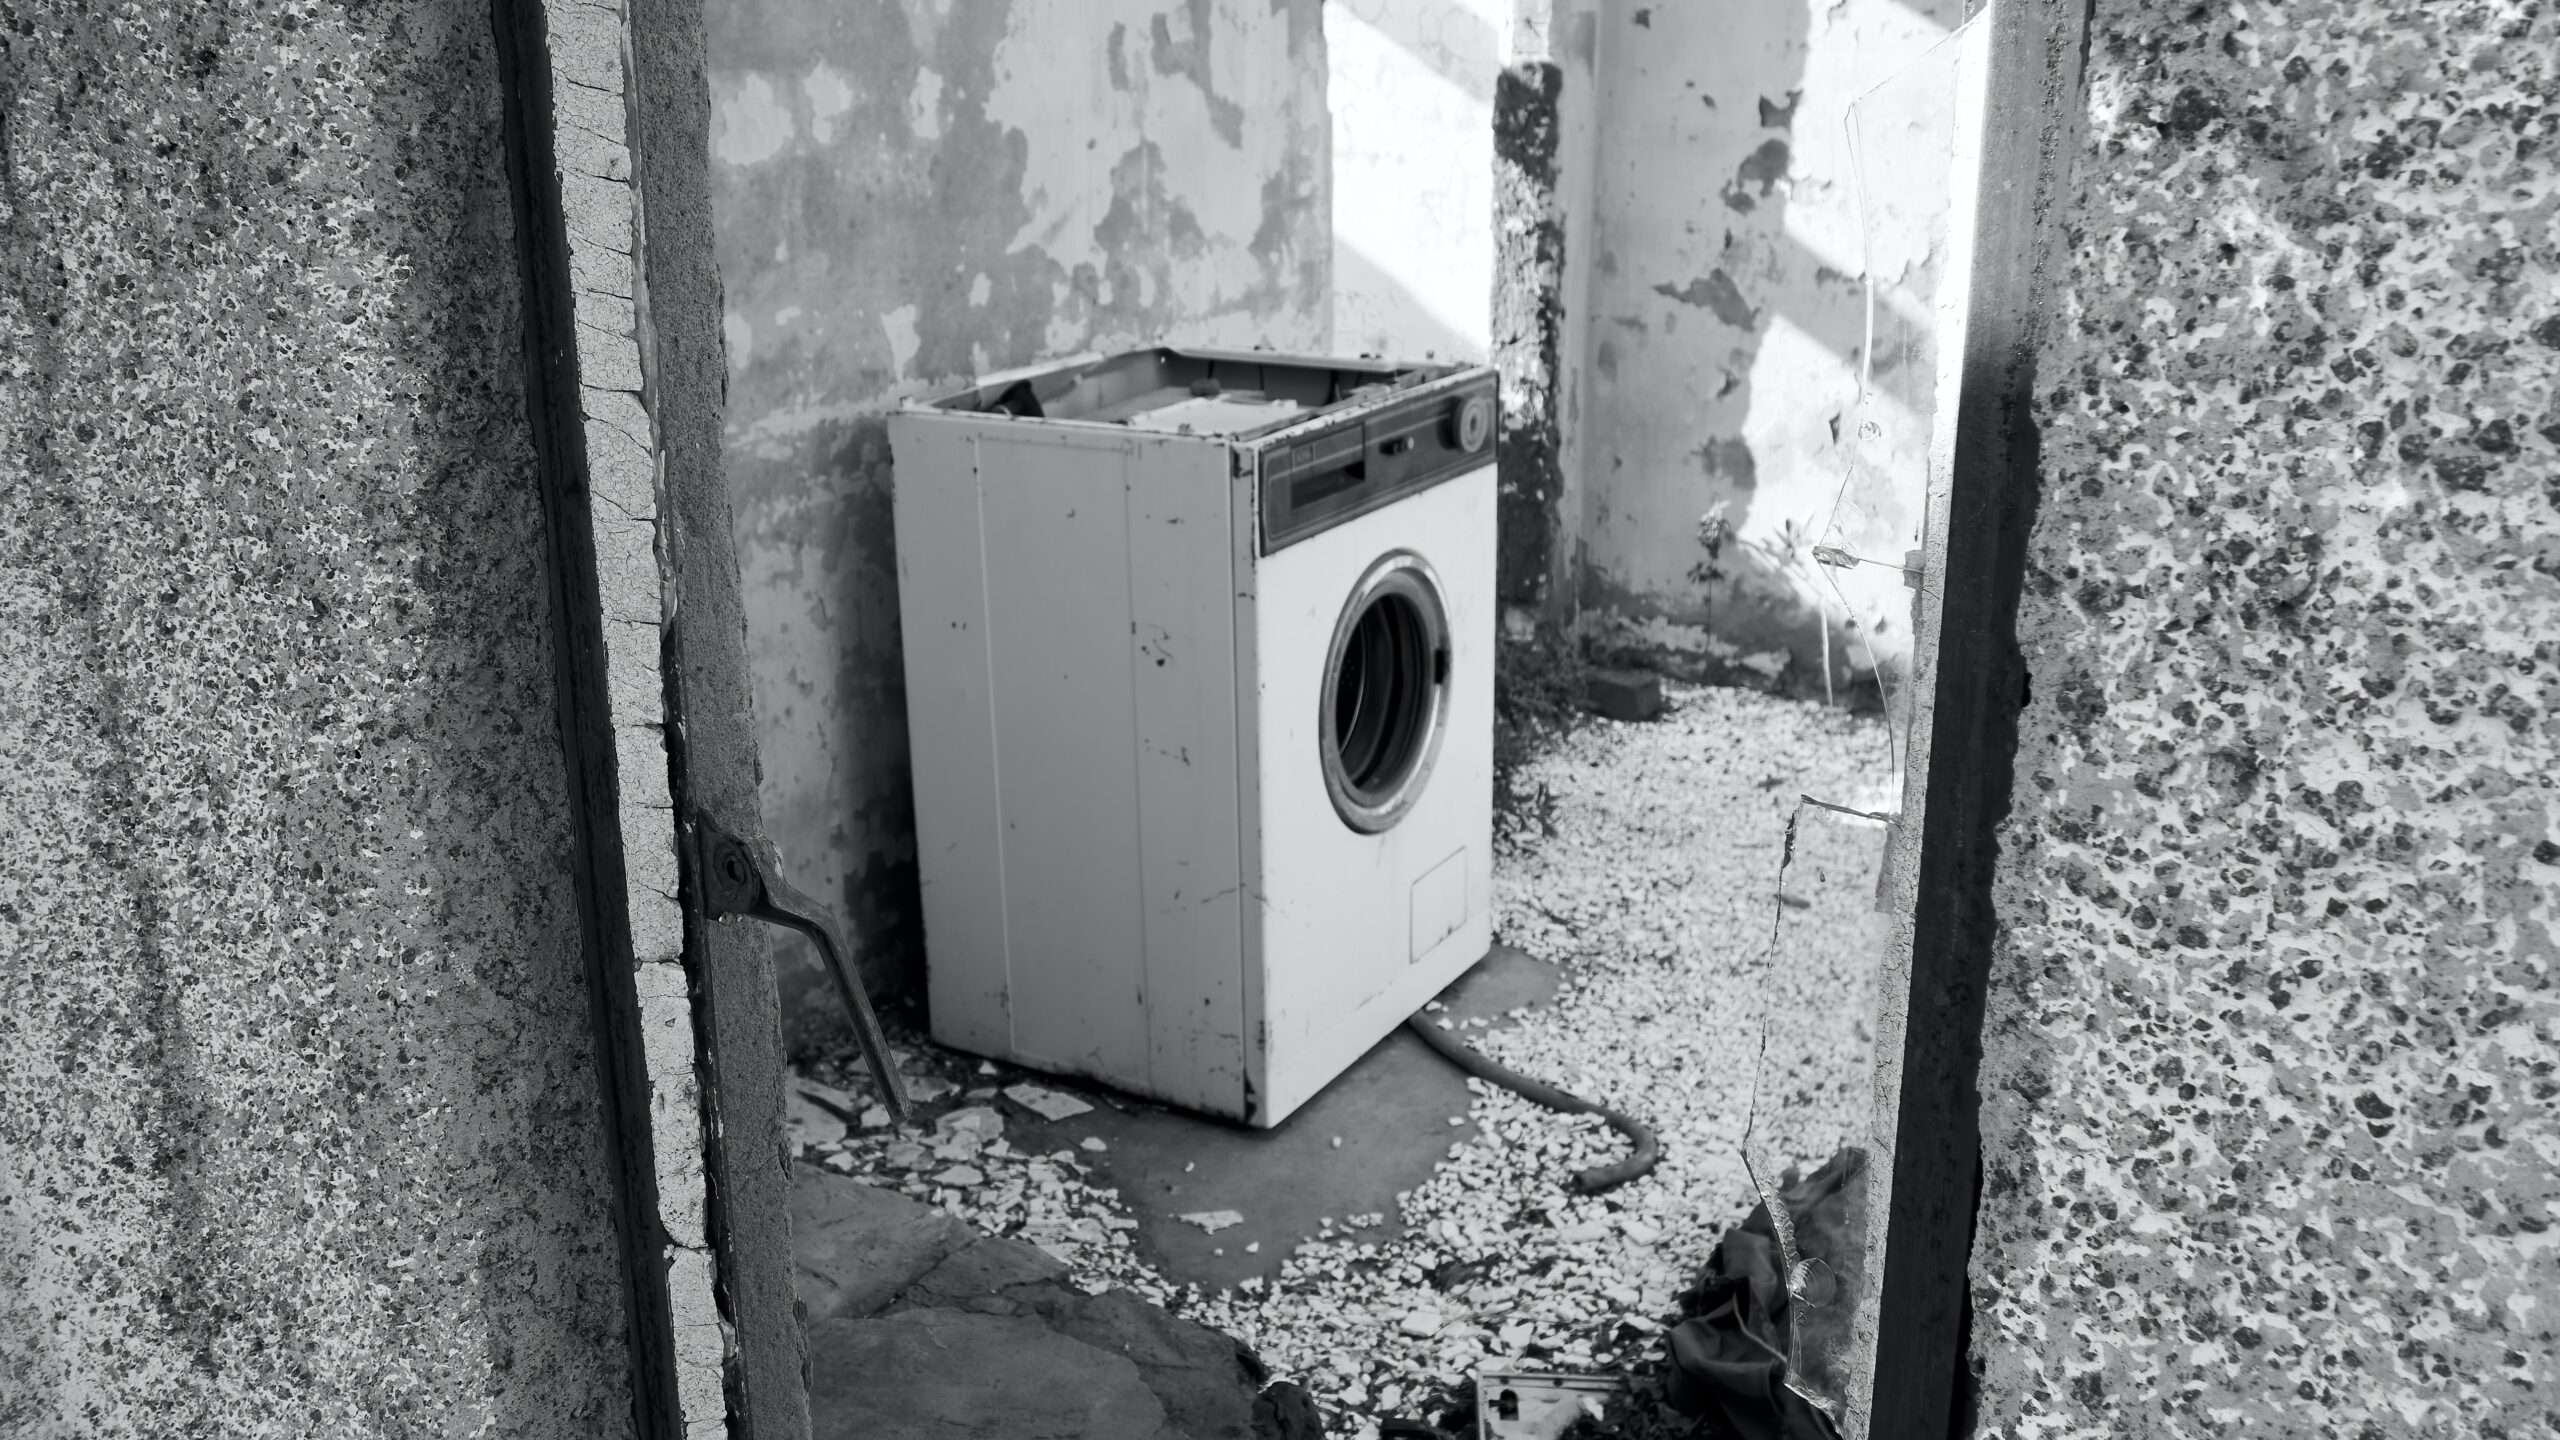 Redo the Laundry Room: Old Washer and Dryer Pick Up